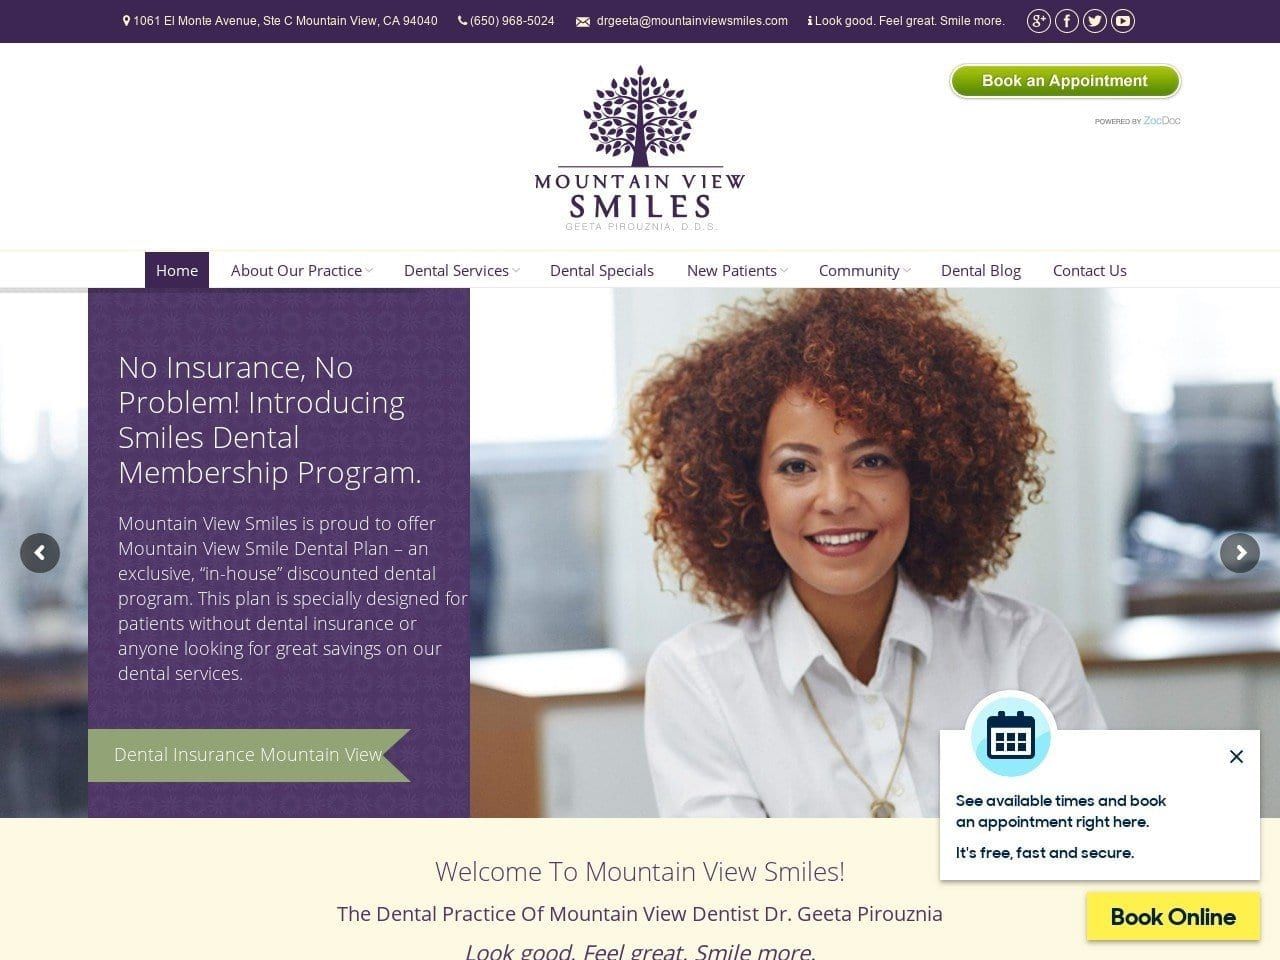 Mountain View Smiles Website Screenshot from mountainviewsmiles.com